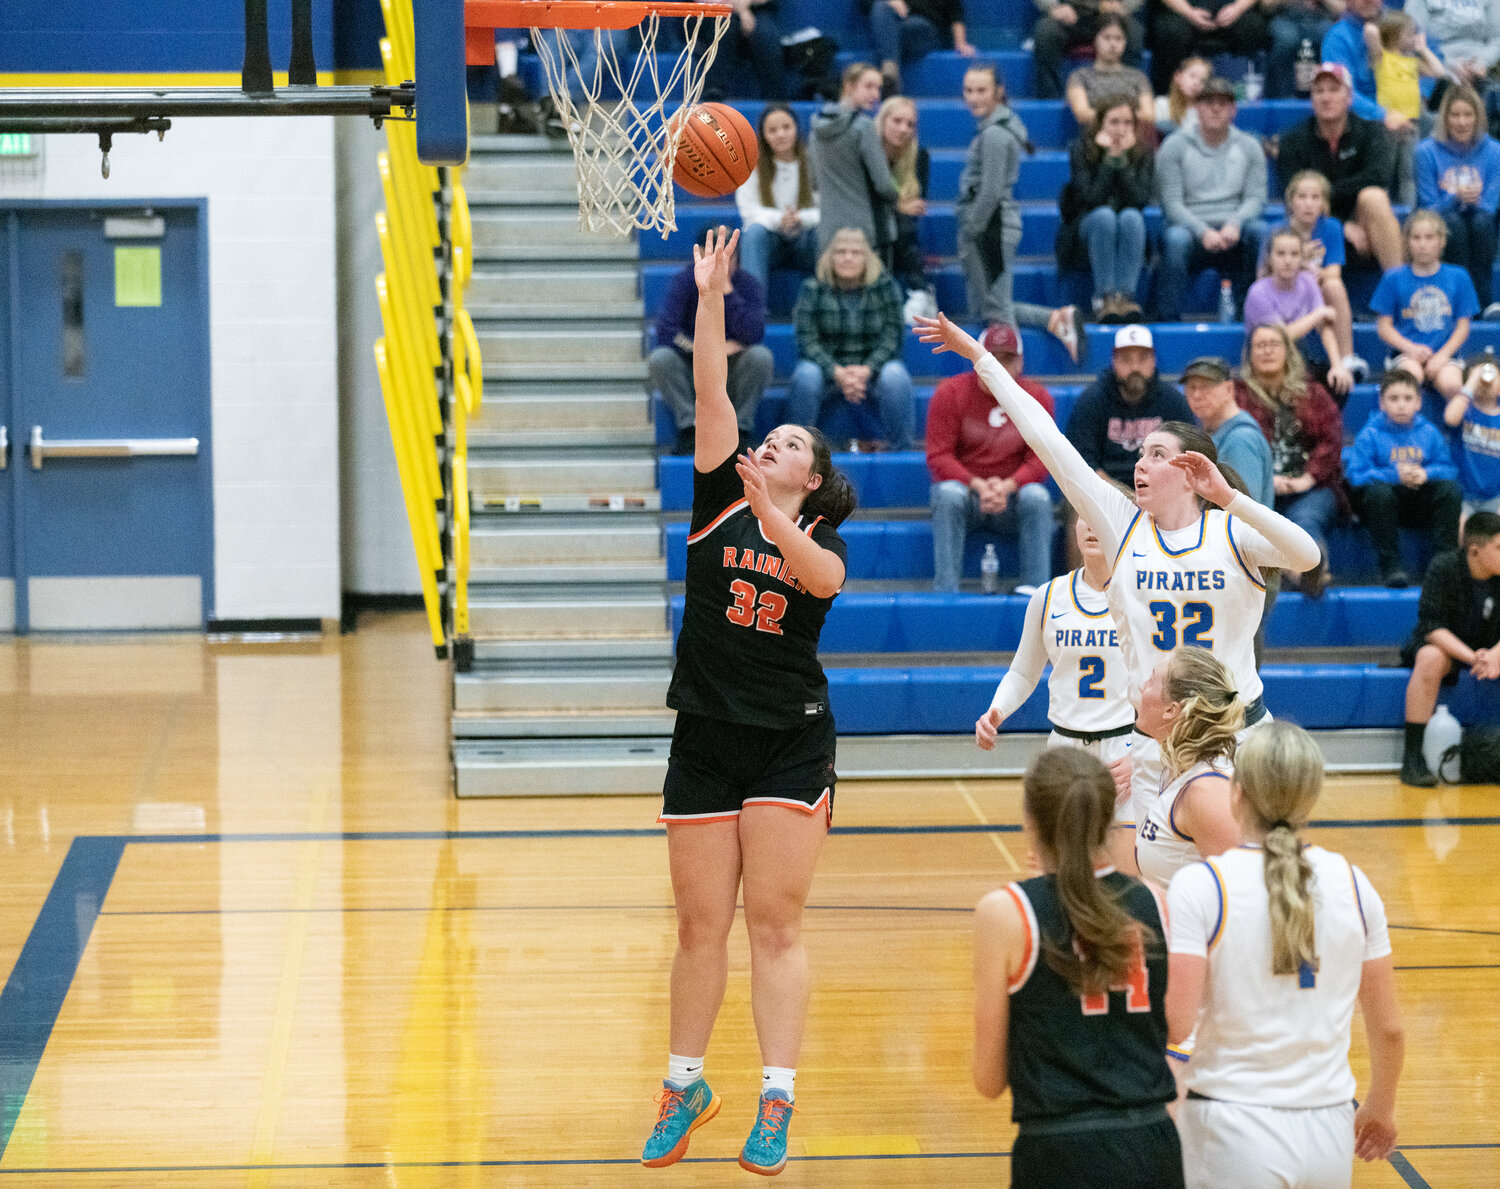 Haleigh Hanson goes up for a bucket in the paint during the second half of Rainier's 52-49 win at Adna on Dec. 8.